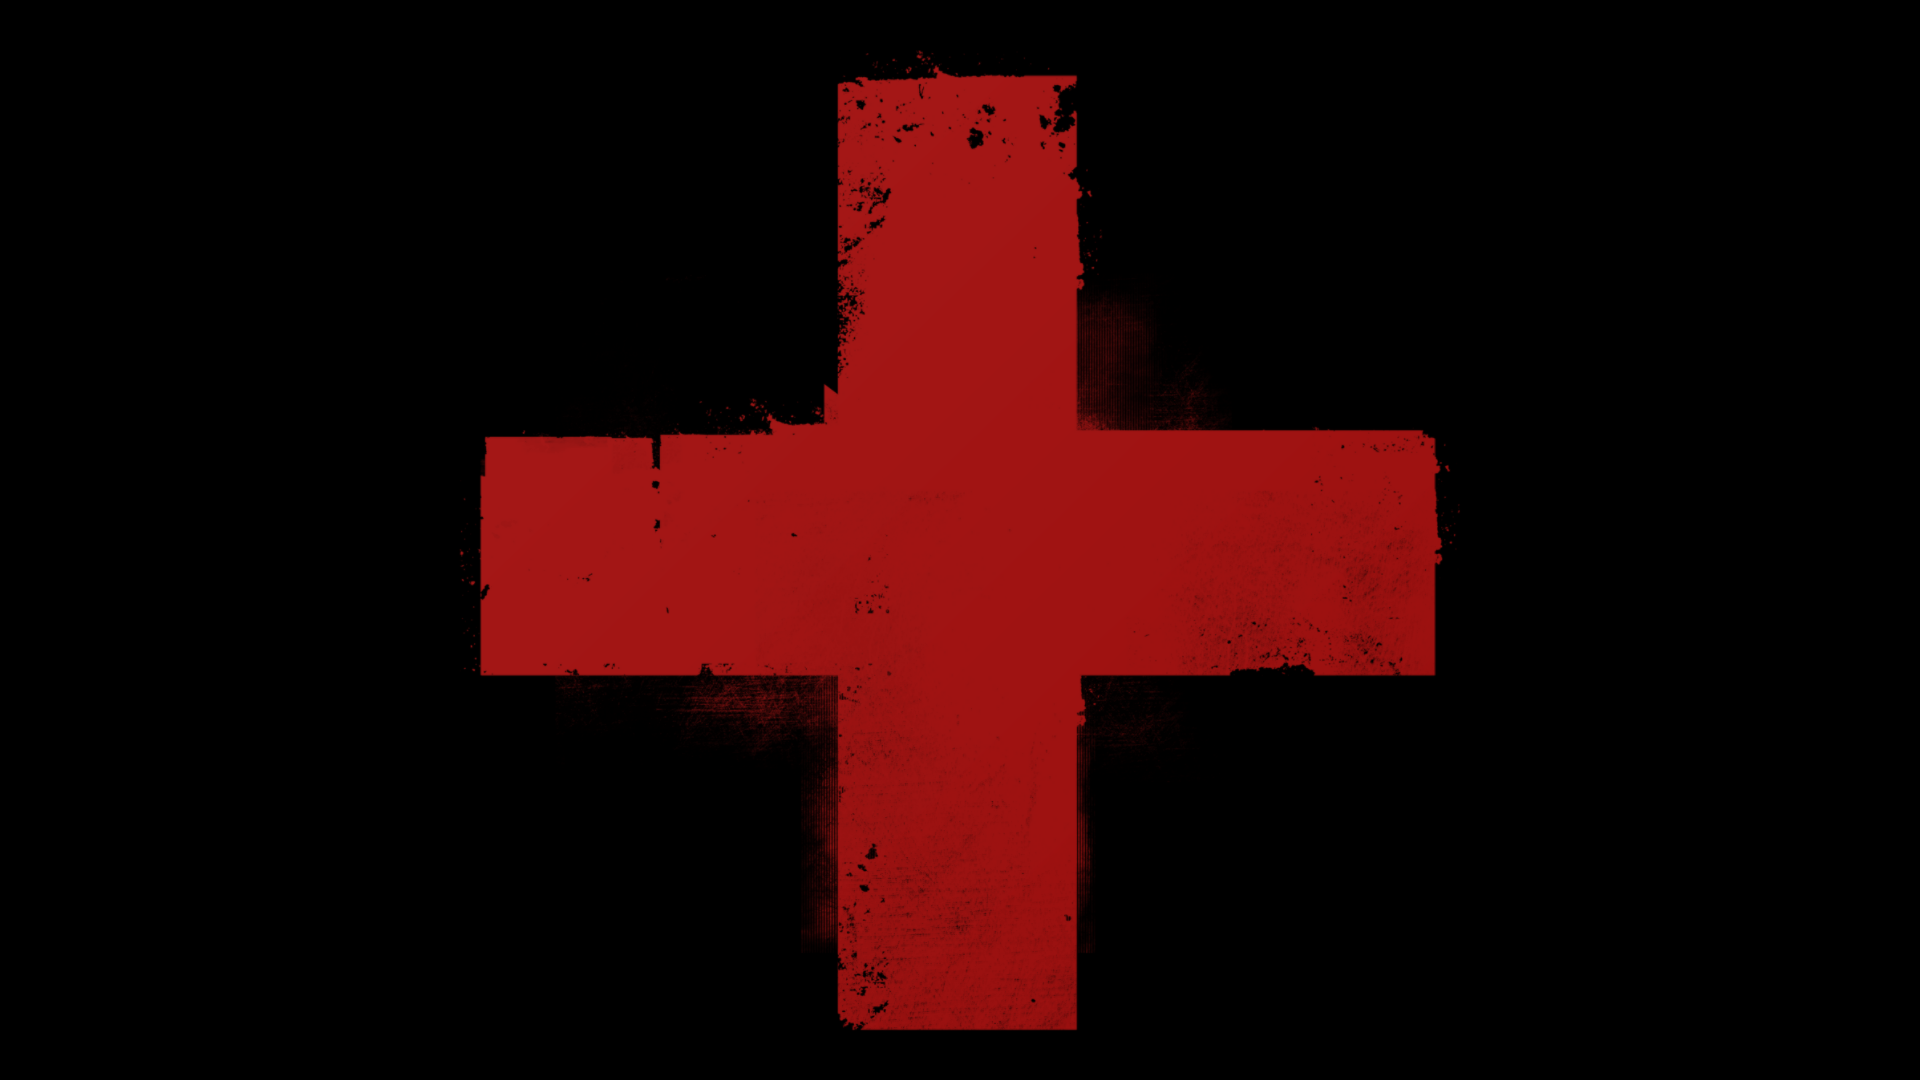 General 1920x1080 red cross cross red hospital black background